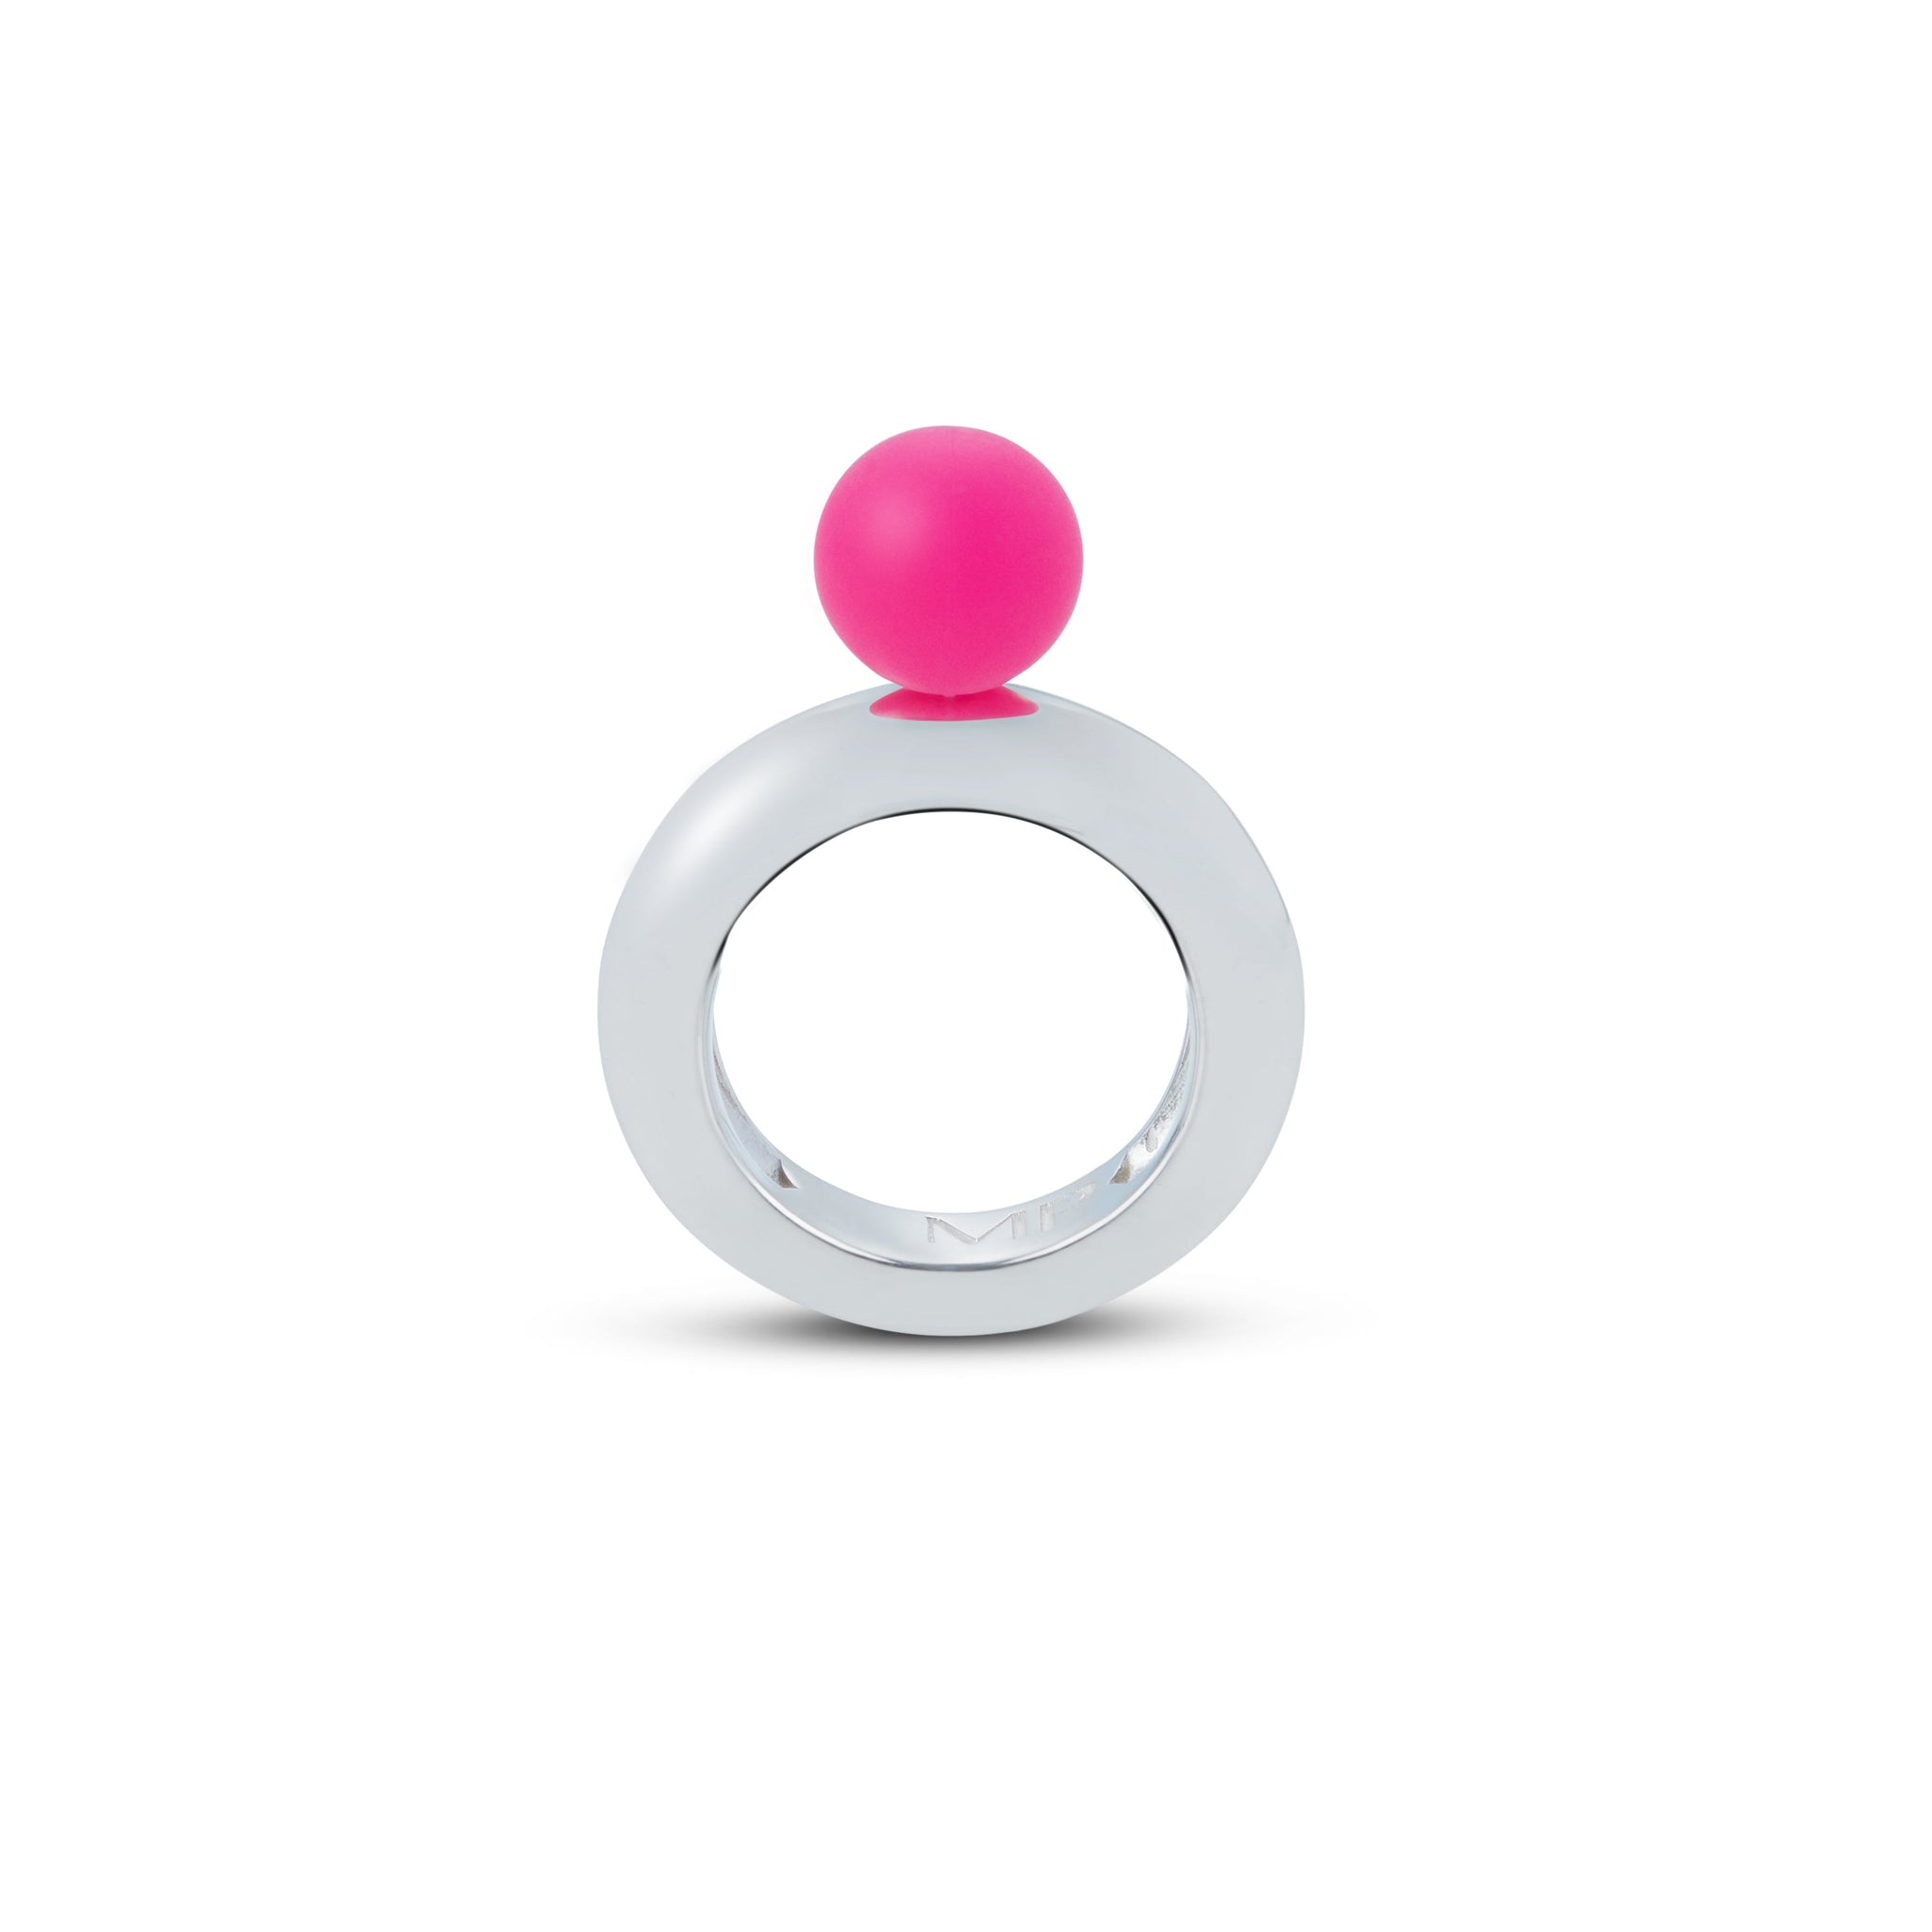 Madame Palm solitaire ring self-love in fuchsia silicone pearl and white gold 18kt band